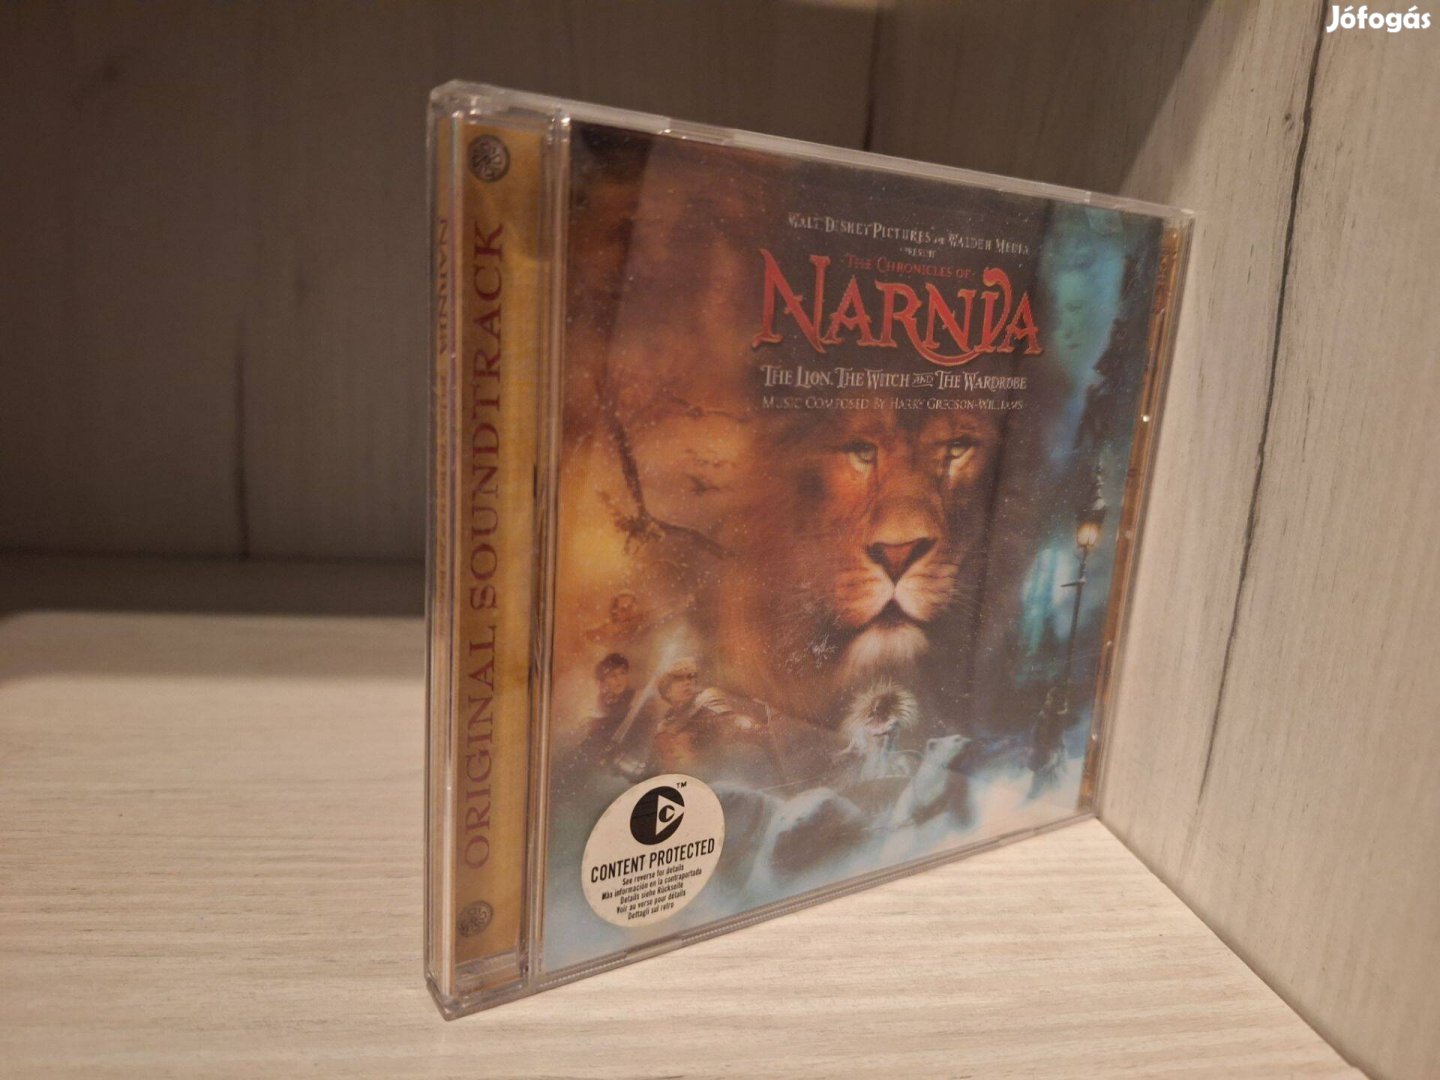 The Chronicles Of Narnia: The Lion, The Witch And The Wardrobe CD